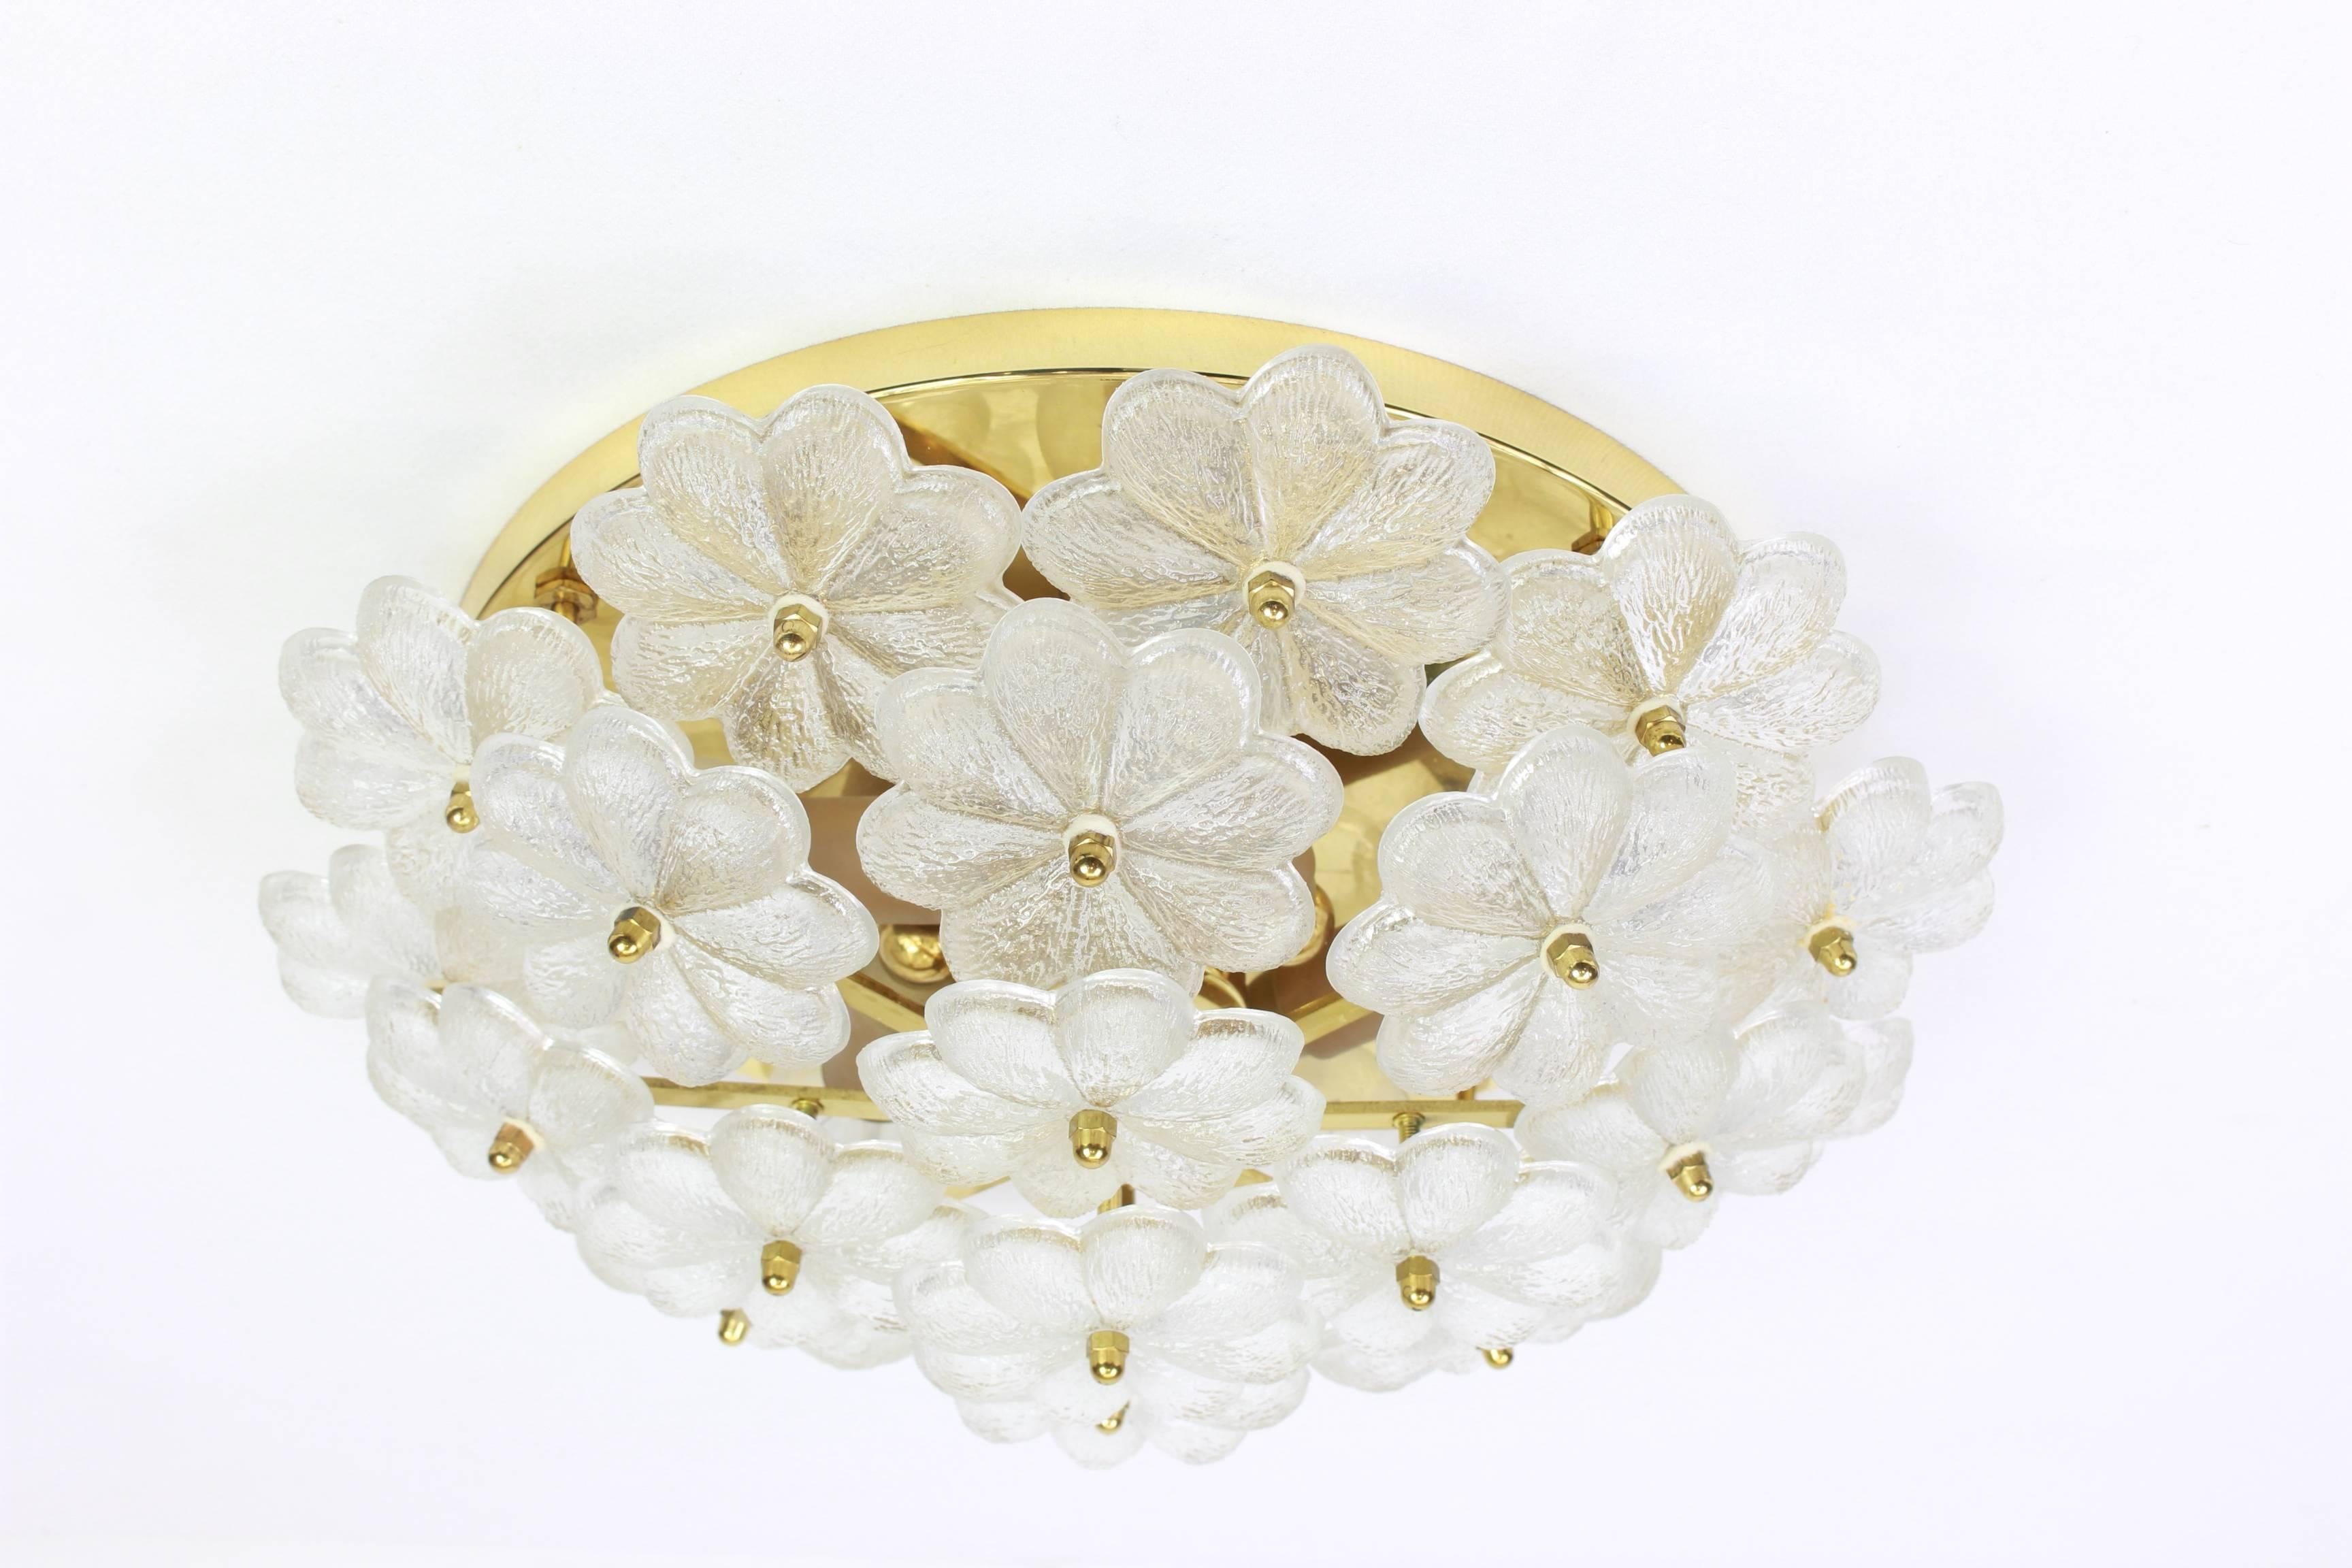 Midcentury flushmount light or Wall sconce with 24 Murano glass flowers over a polished brass base, made by Ernst Palme in Germany, 1970s

High quality and in very good condition. Cleaned, well-wired and ready to use. 

The fixture requires 5 x